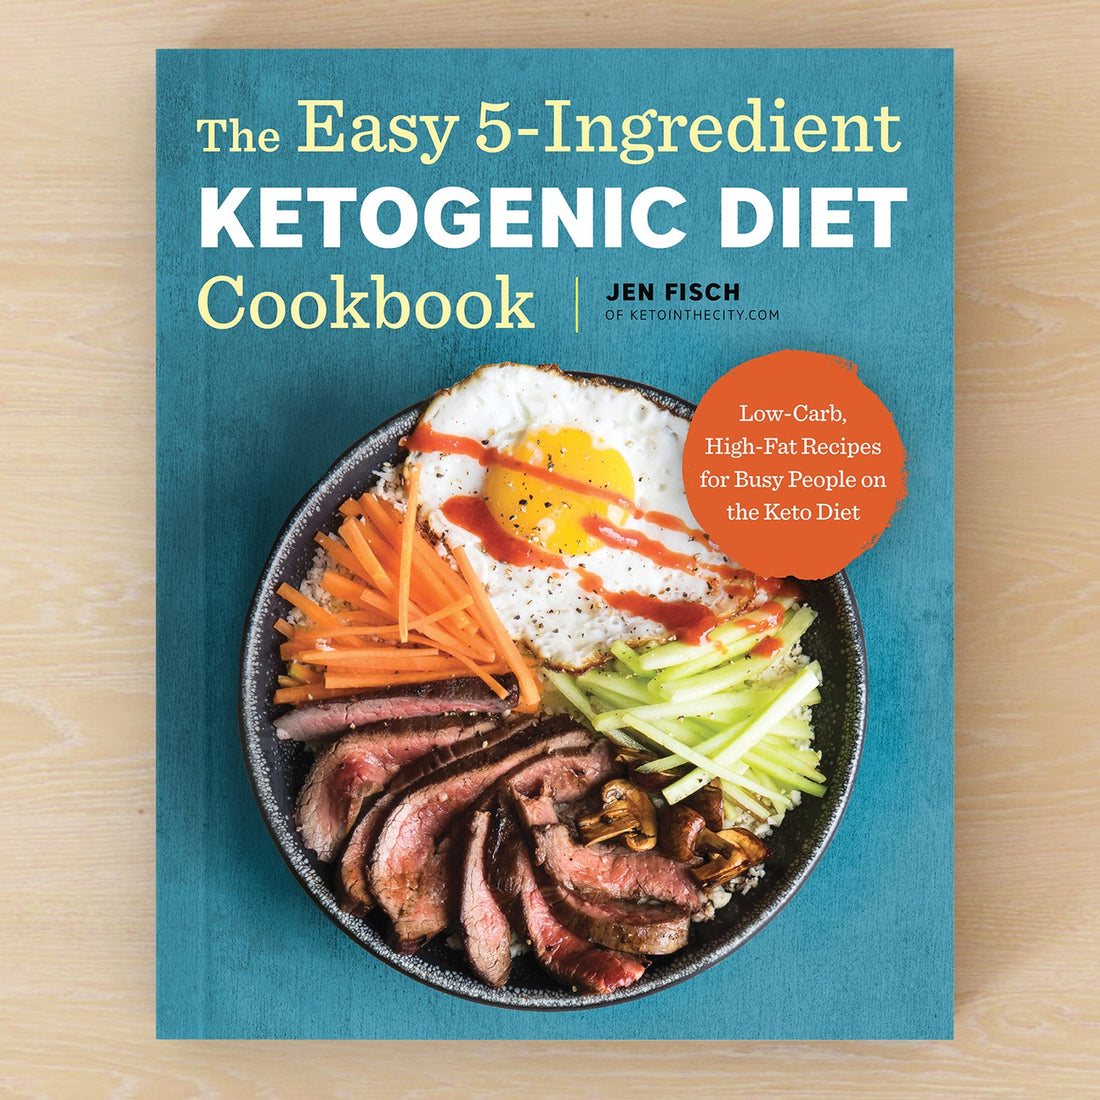 The Easy 5 Ingredient Keto Cookbook with Jen Fisch – Miracle Noodle